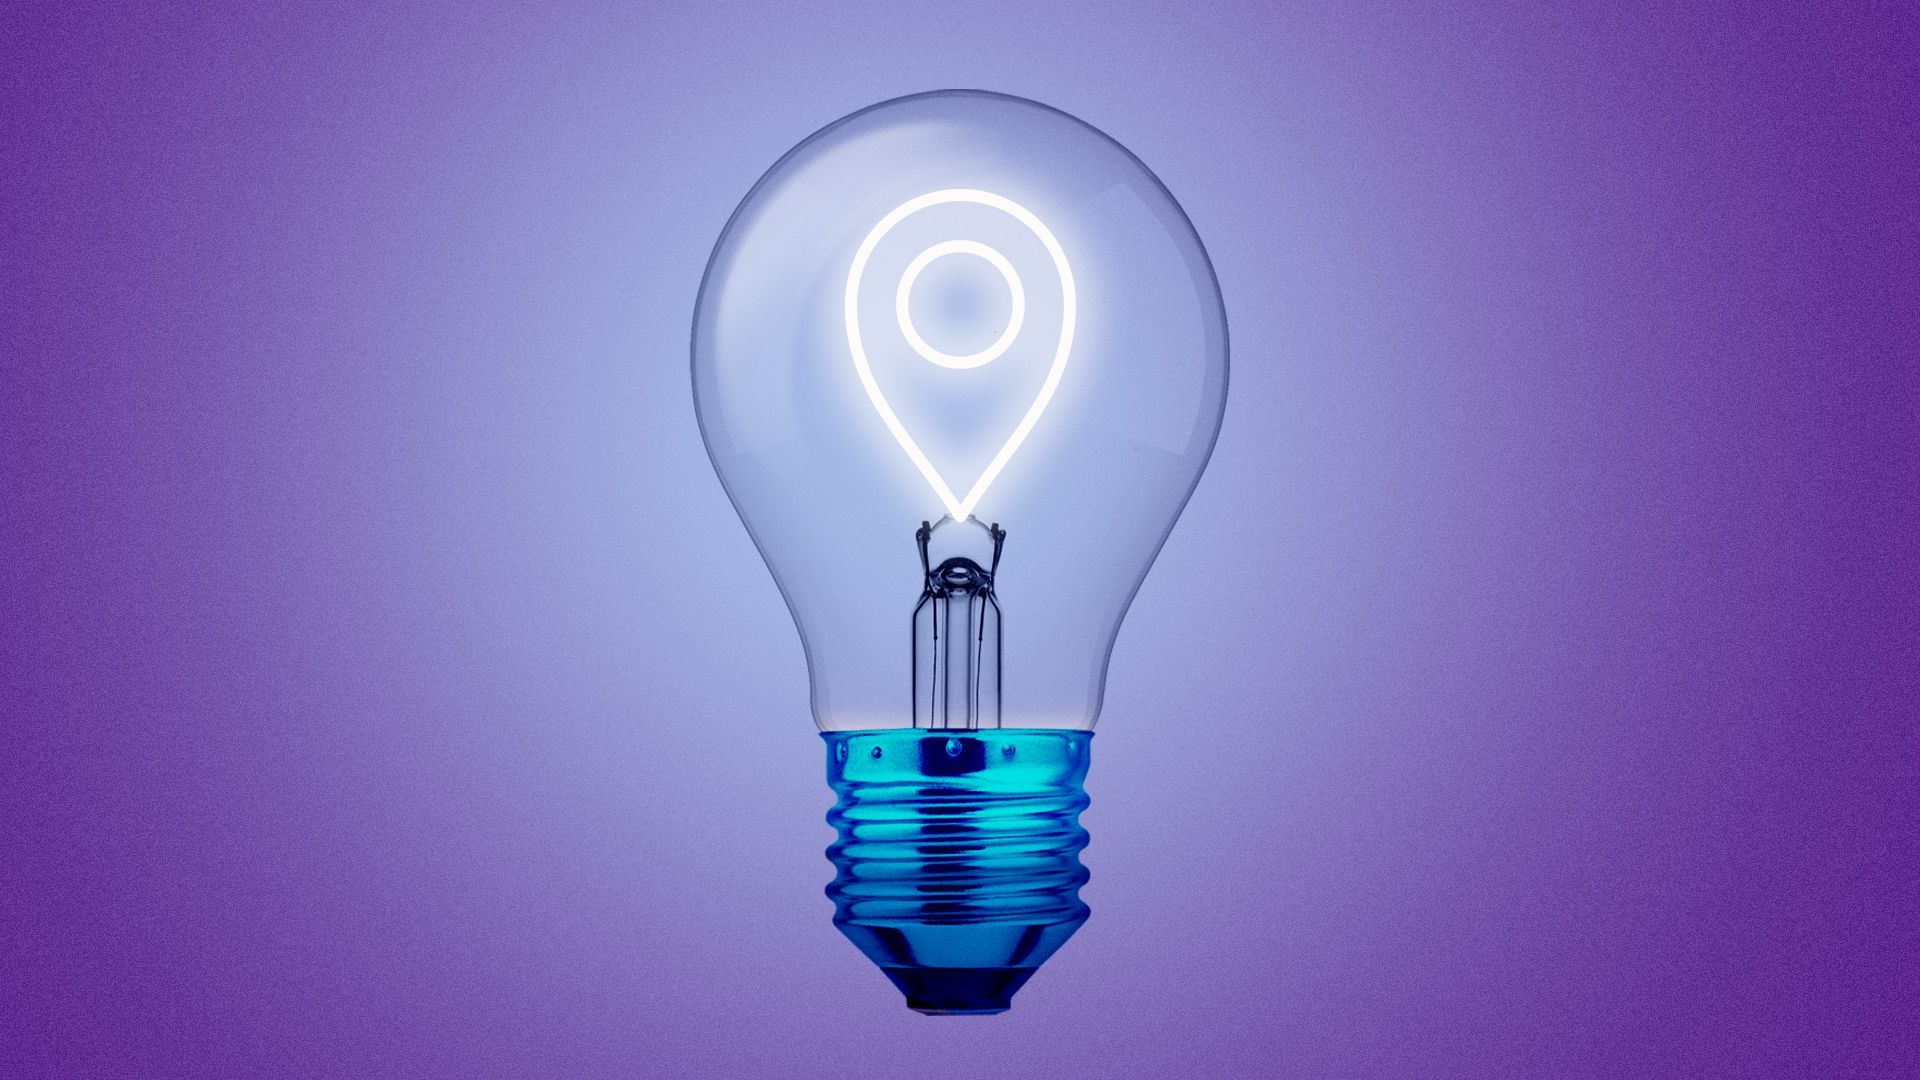 Illustration of a lightbulb with a location icon for the filament 